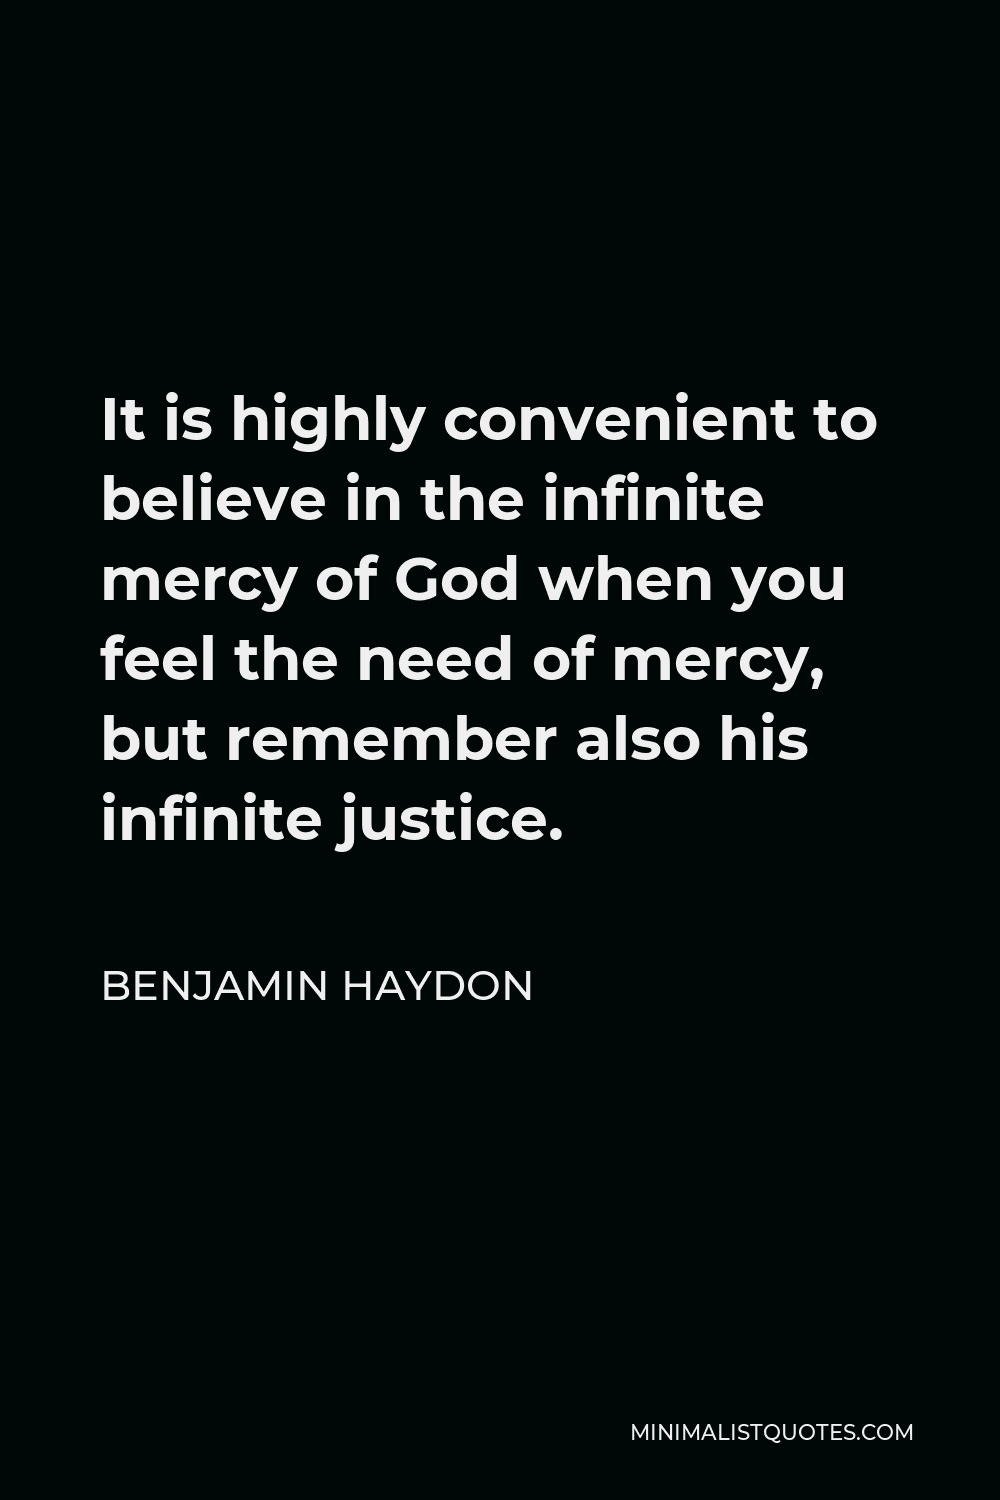 Benjamin Haydon Quote - It is highly convenient to believe in the infinite mercy of God when you feel the need of mercy, but remember also his infinite justice.